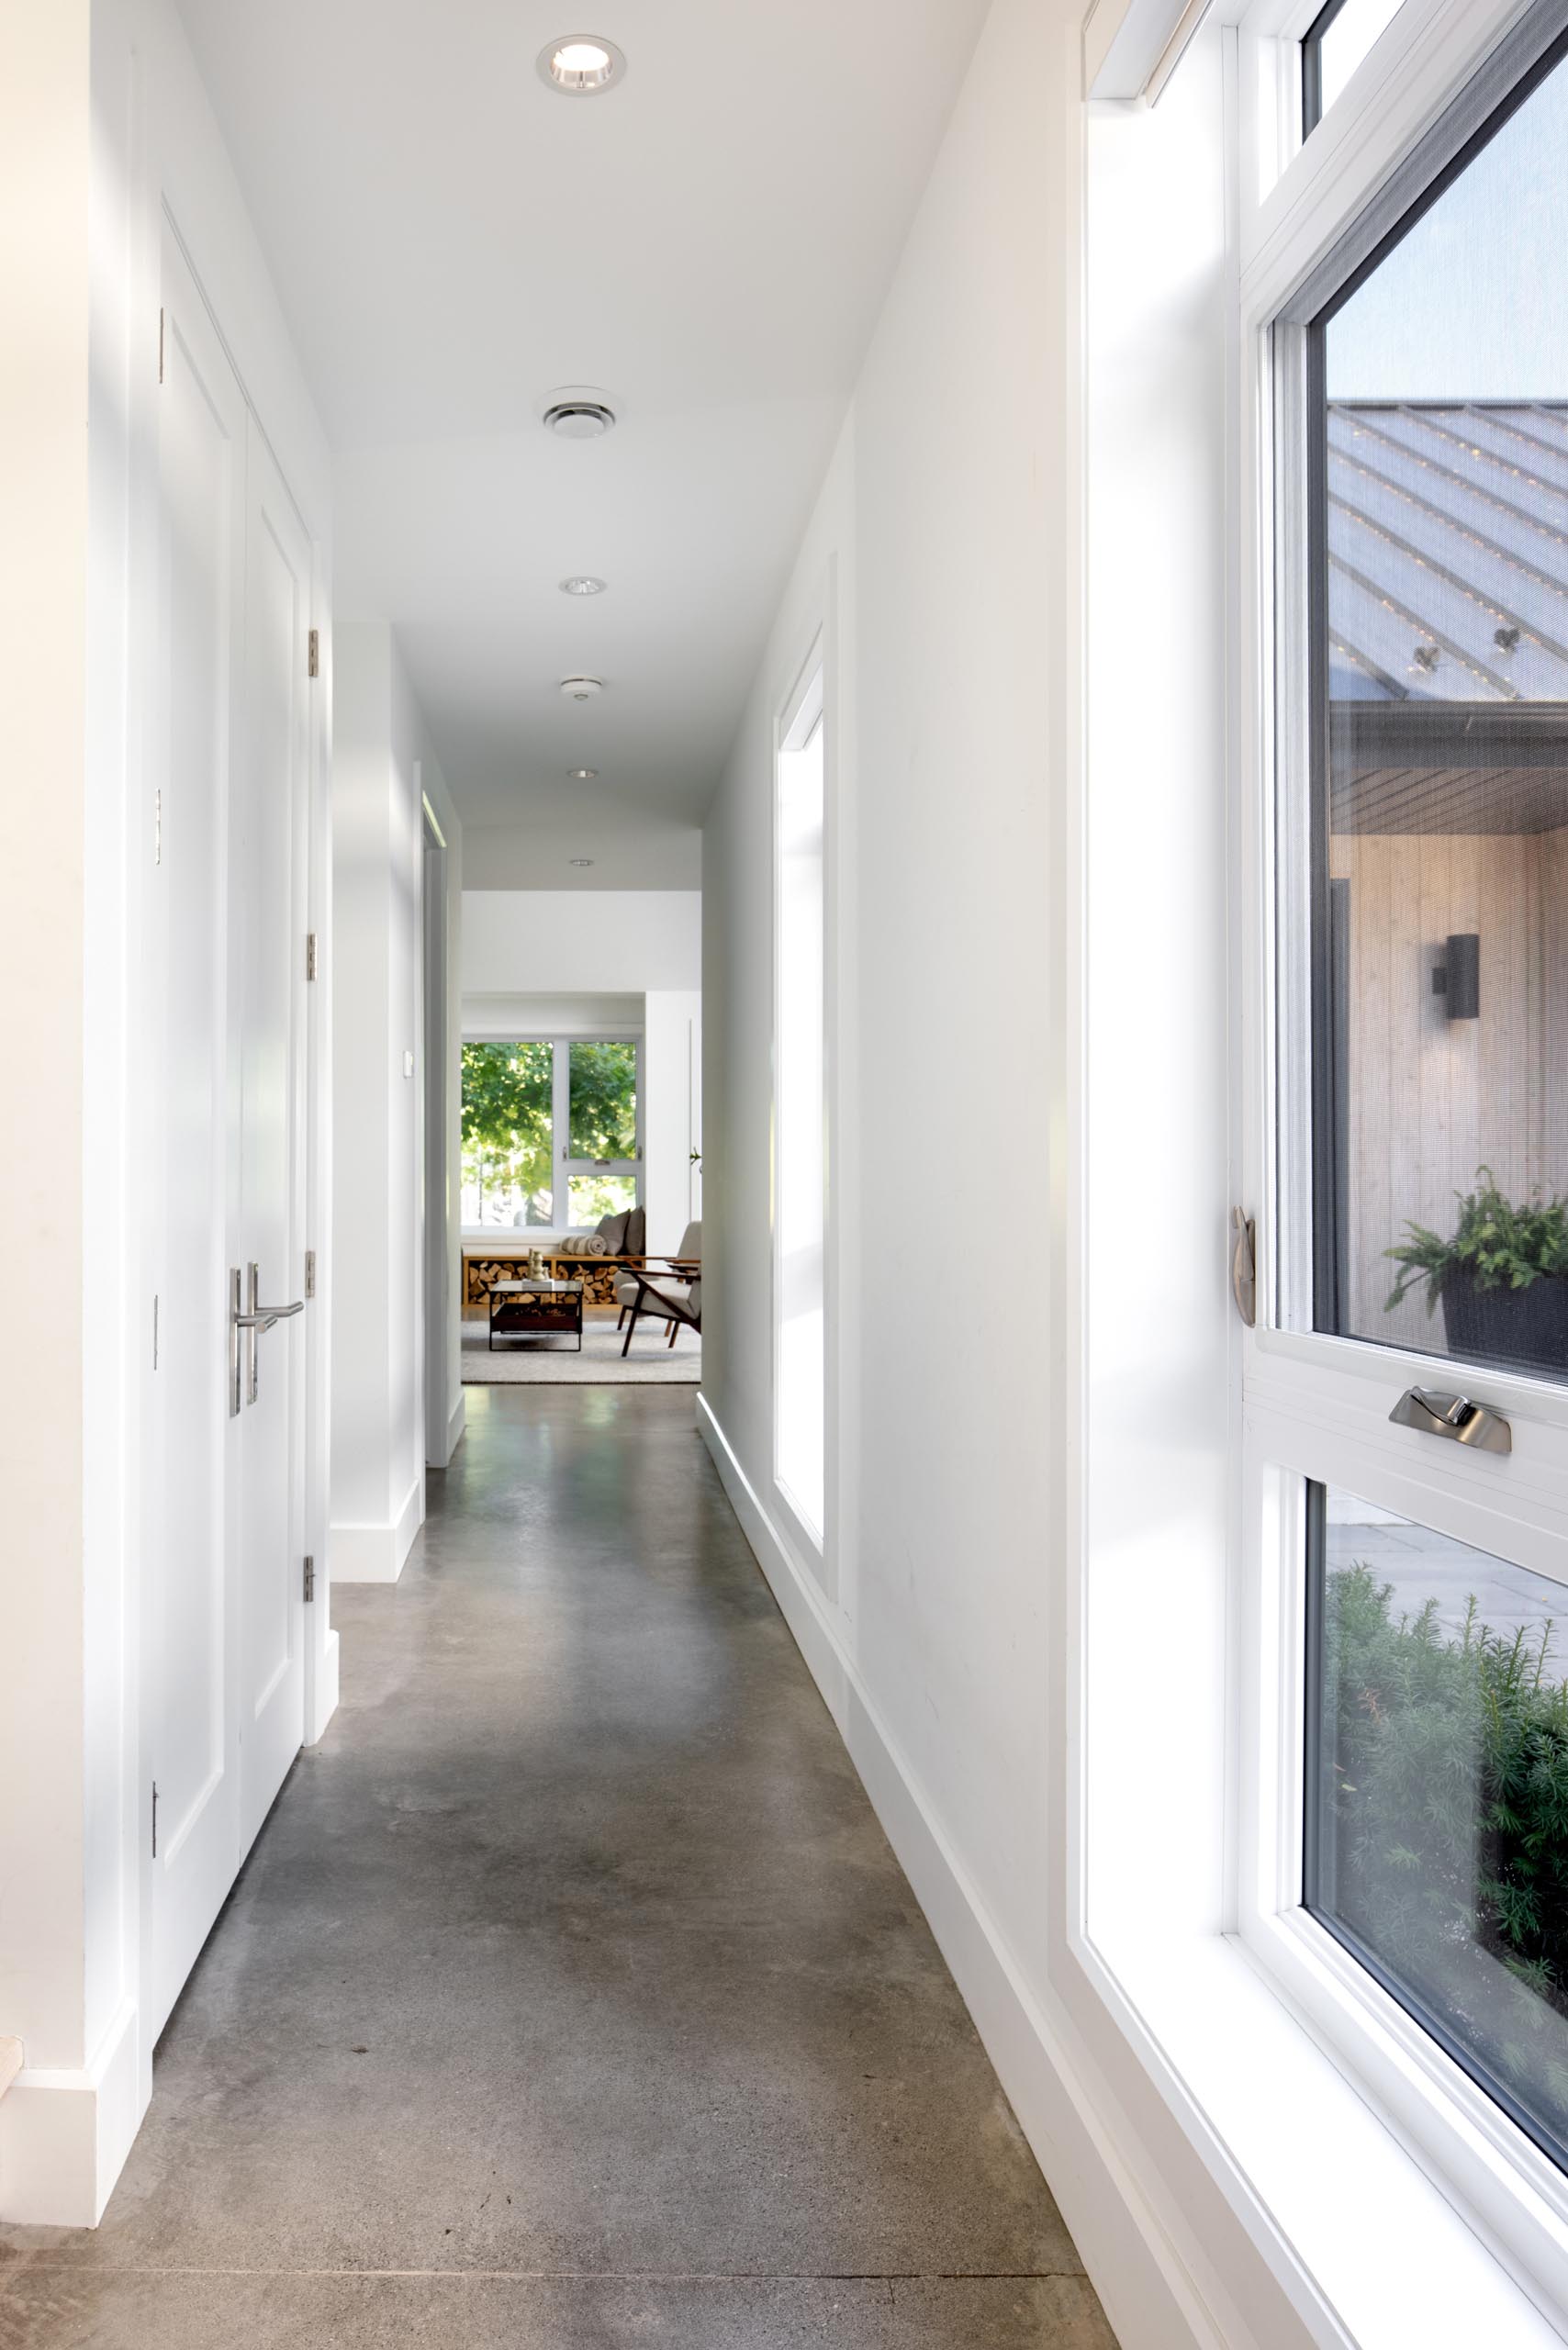 Polished concrete floors are featured throughout this Scandinavian inspired home, like in the hallway.